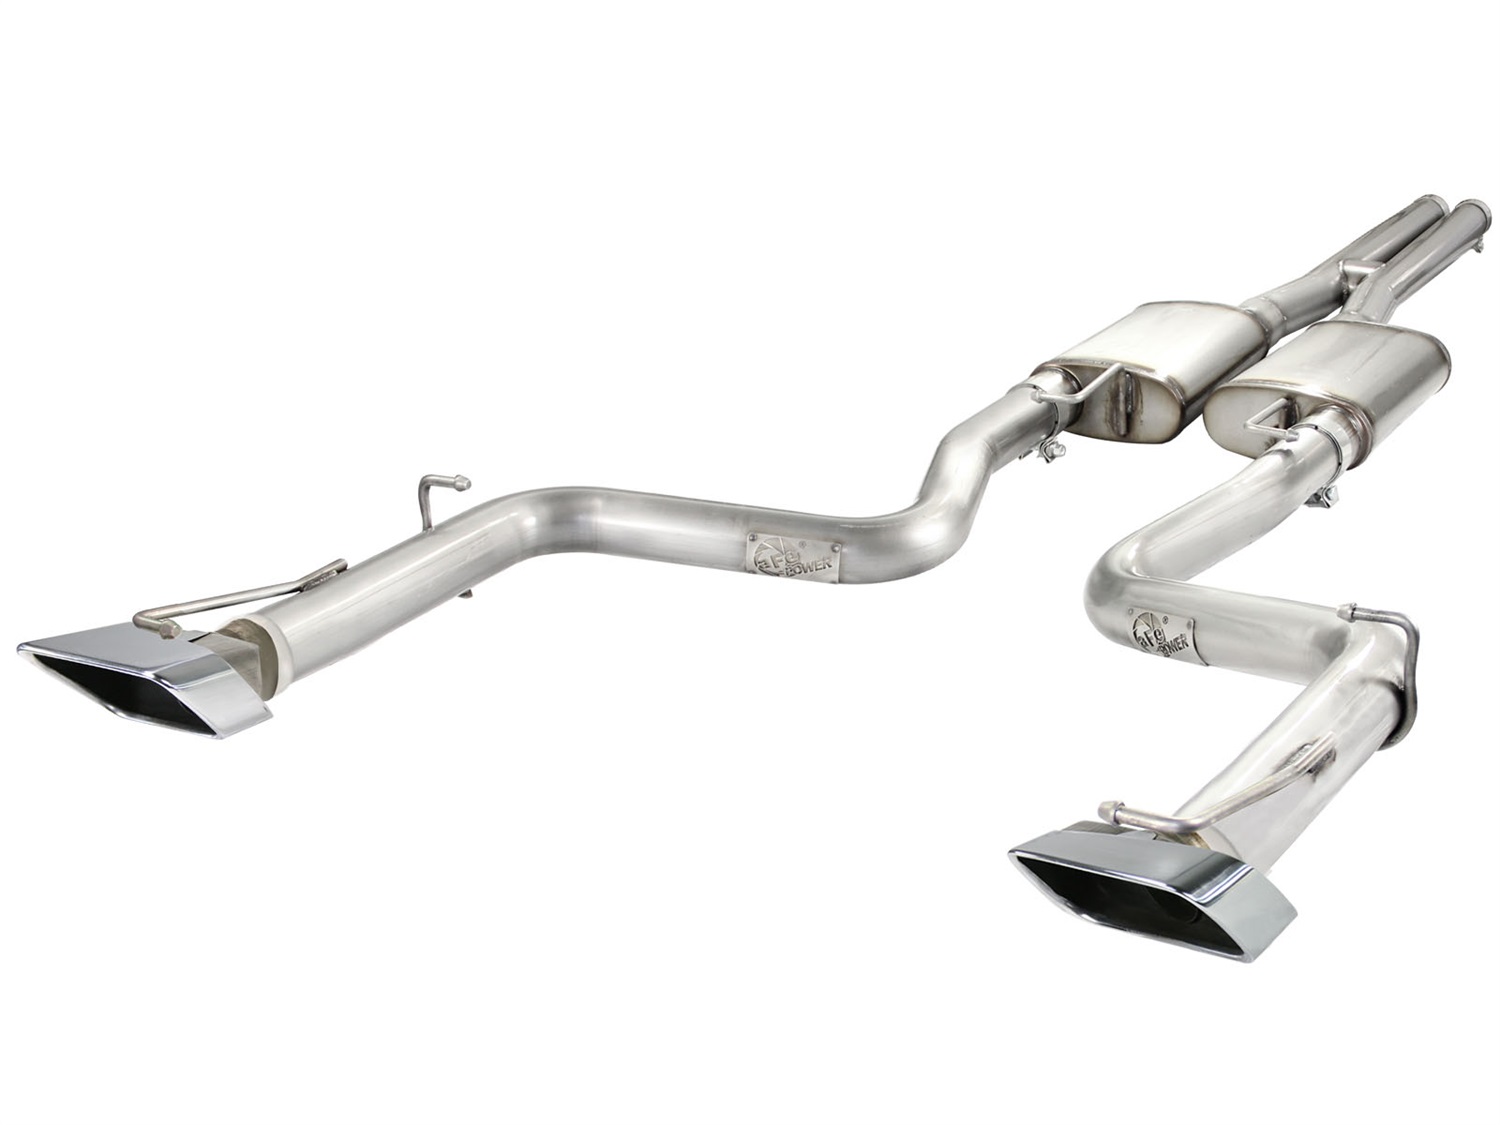 aFe Power aFe Power 49-42028 MACHForce XP Exhaust System Fits 08-12 Challenger